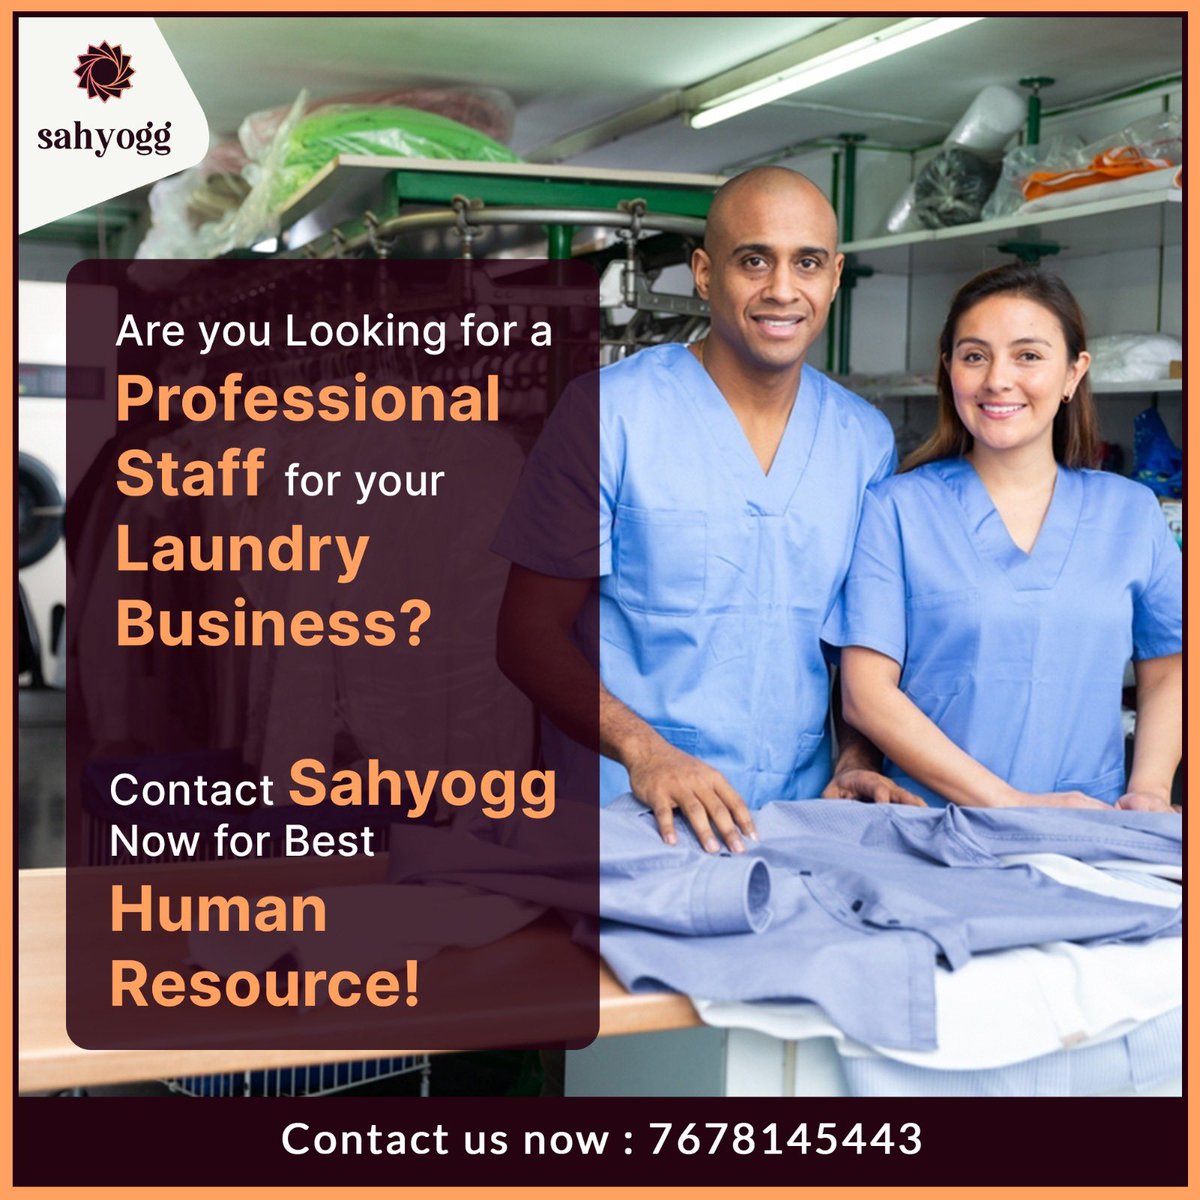 Yes, we can offer you best professional human resource for your laundry business. 
For details, you can contact us on +91 7678145443

#Sahyogg #yourguide #laundrybusiness #professionals #laundryprofessionals